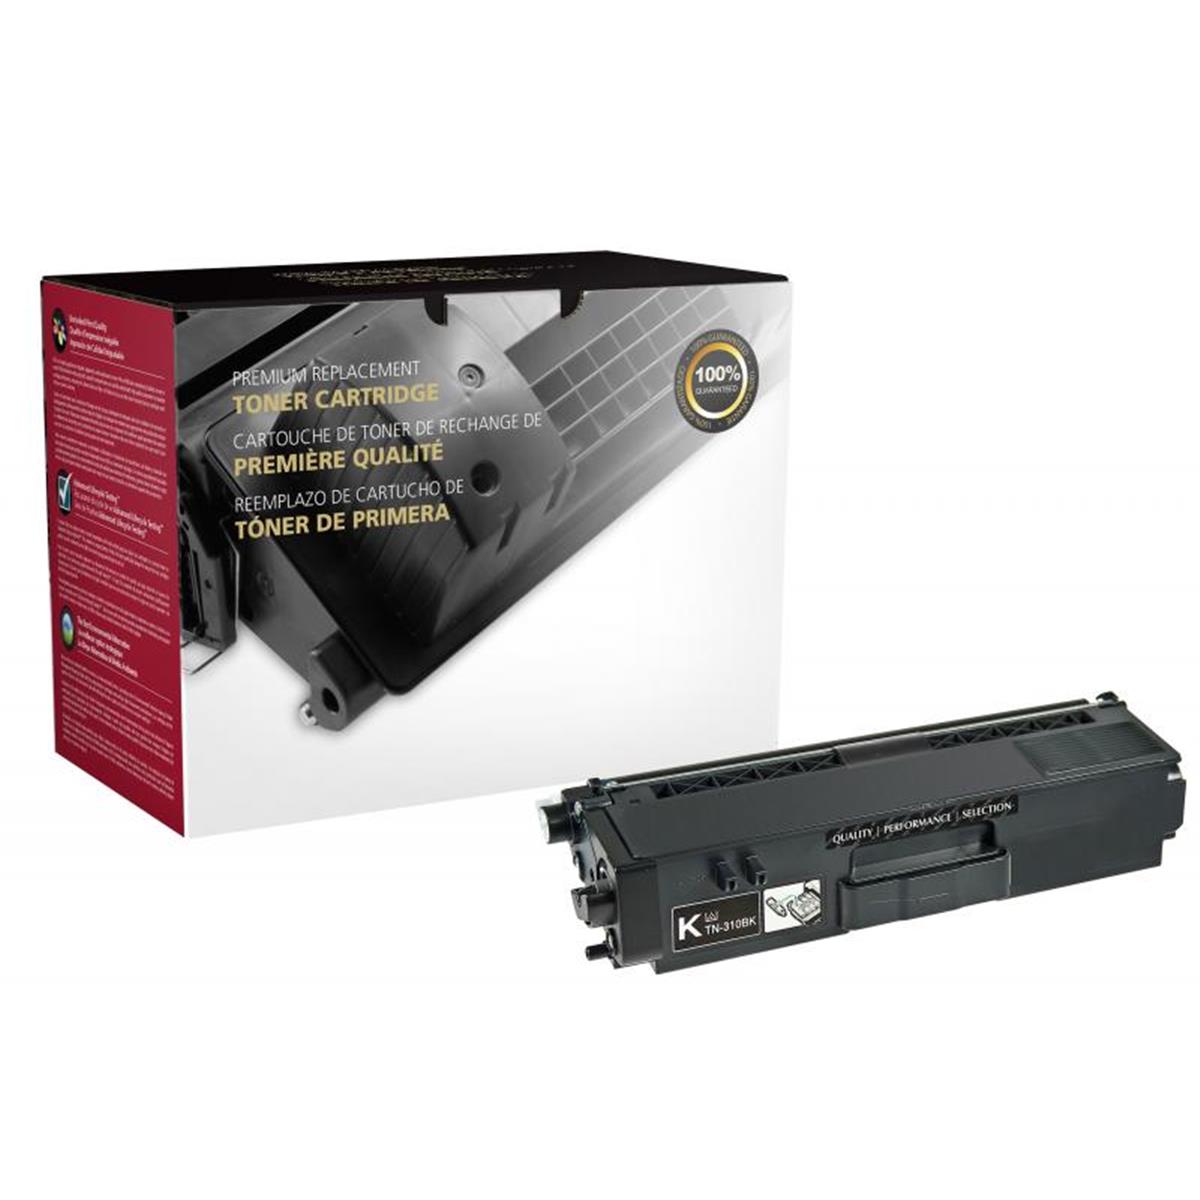 Picture of Brother 200444 High Yield Black Toner Cartridge for TN315